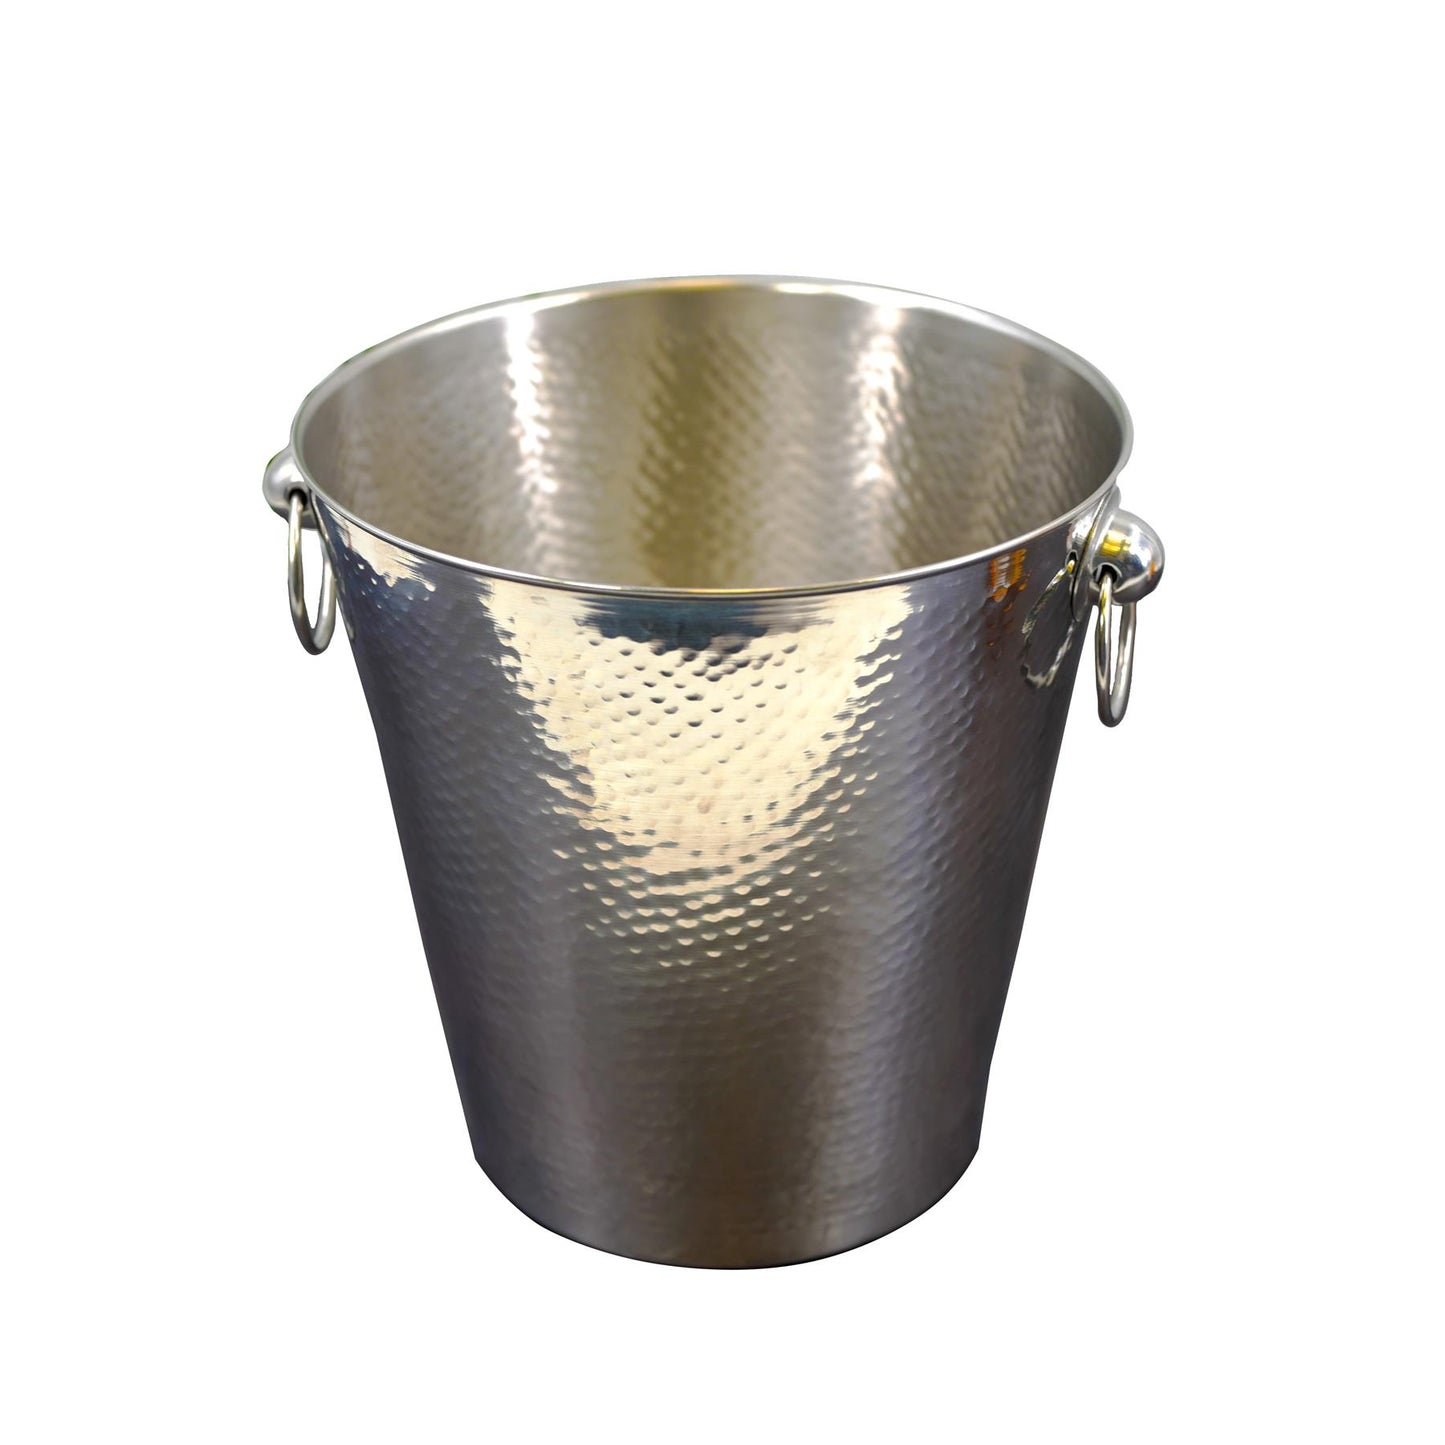 Stainless Steel Ice Bucket Hammered Champagne Drink Wine Cooler With Handles by Geezy - UKBuyZone